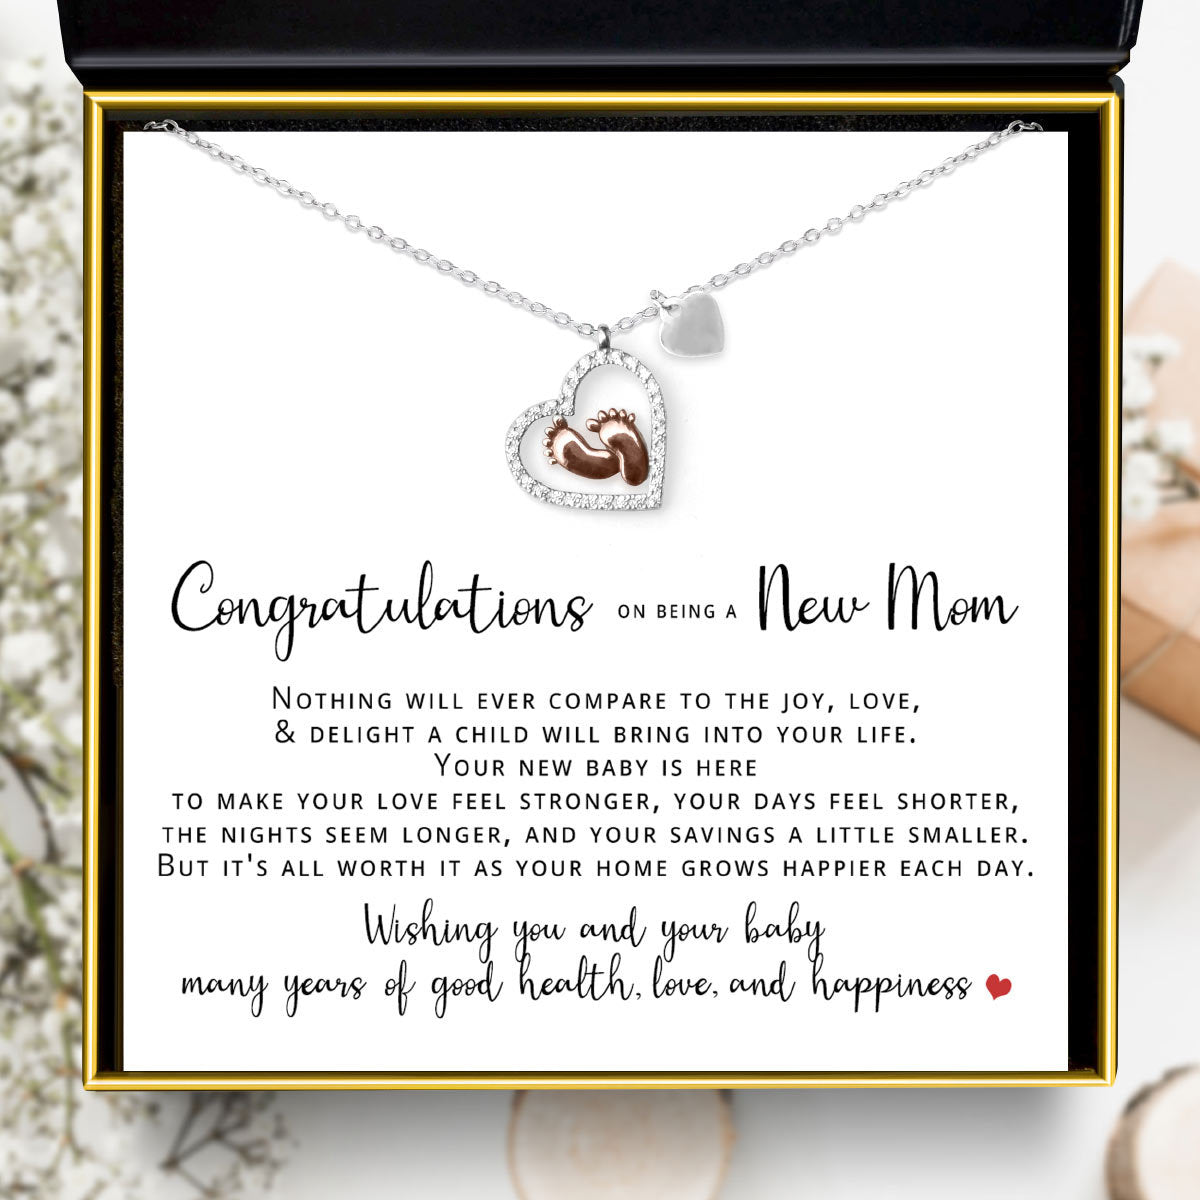 Congrats on Being a New Mom - Baby Feet Heart Pendant Necklace Gift Set